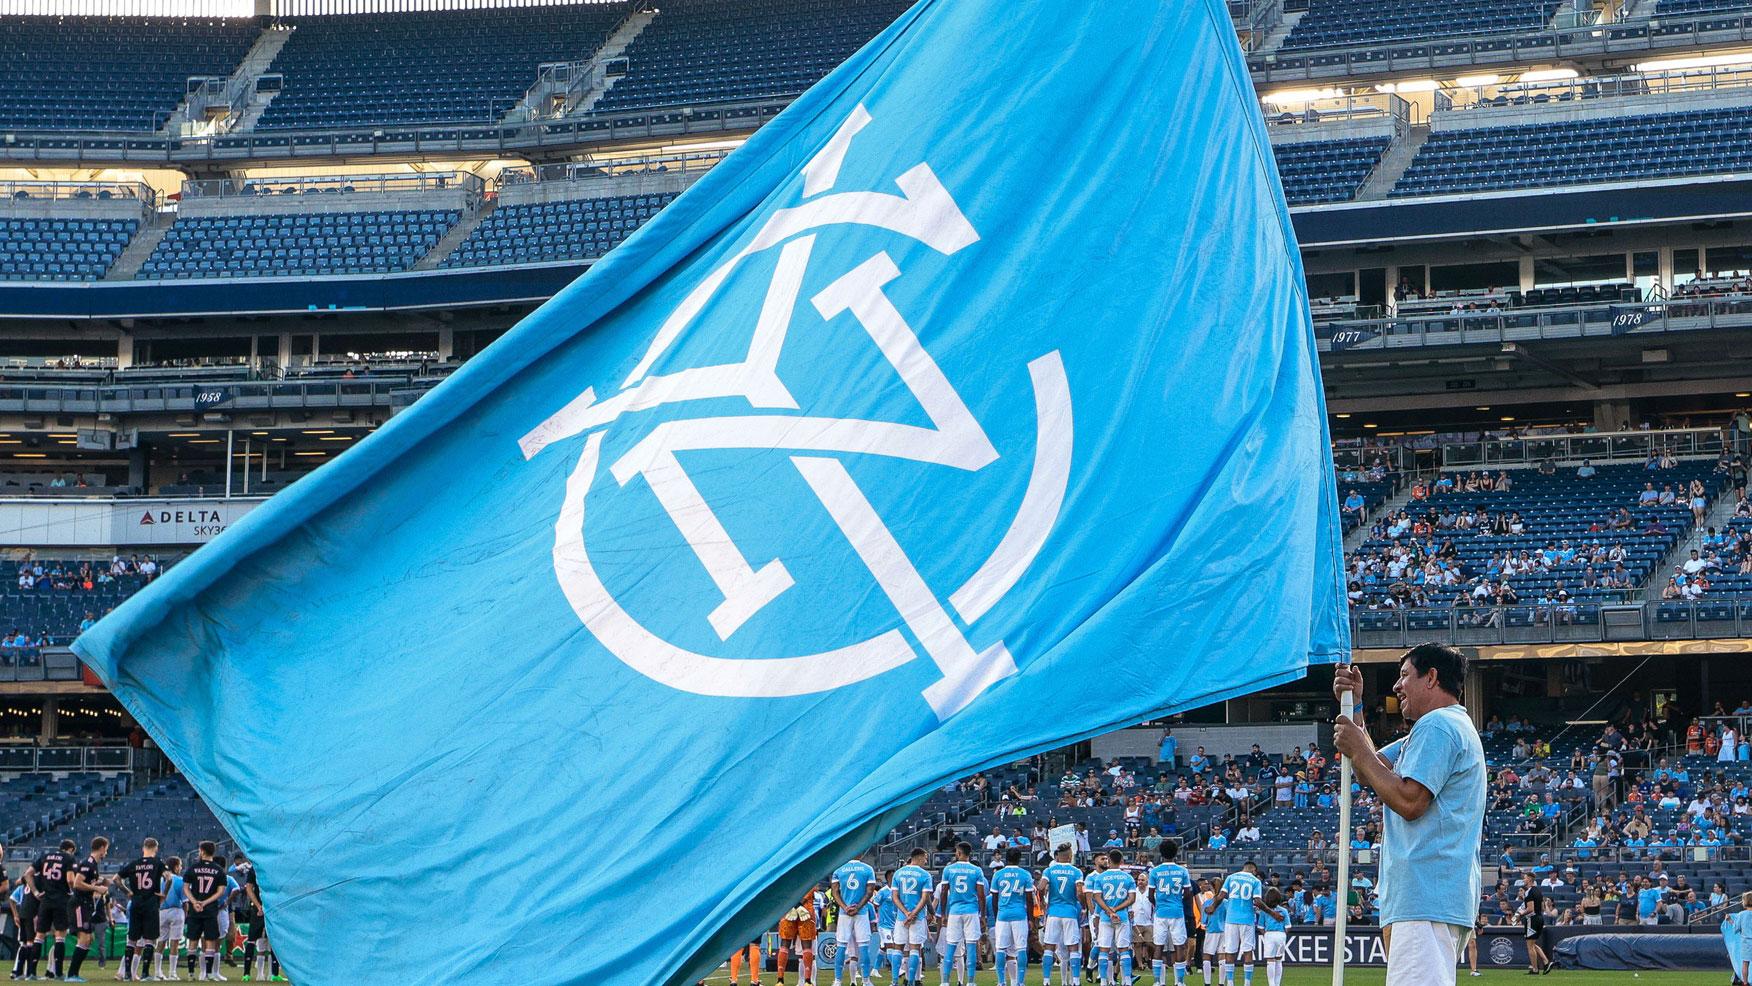 Jul 23, 2022; New York, New York, USA; A fan holds a NYCFC flag on the pitch before a match between New York City FC and Inter Miami CF at Yankee Stadium. / Vincent Carchietta-USA TODAY Sports